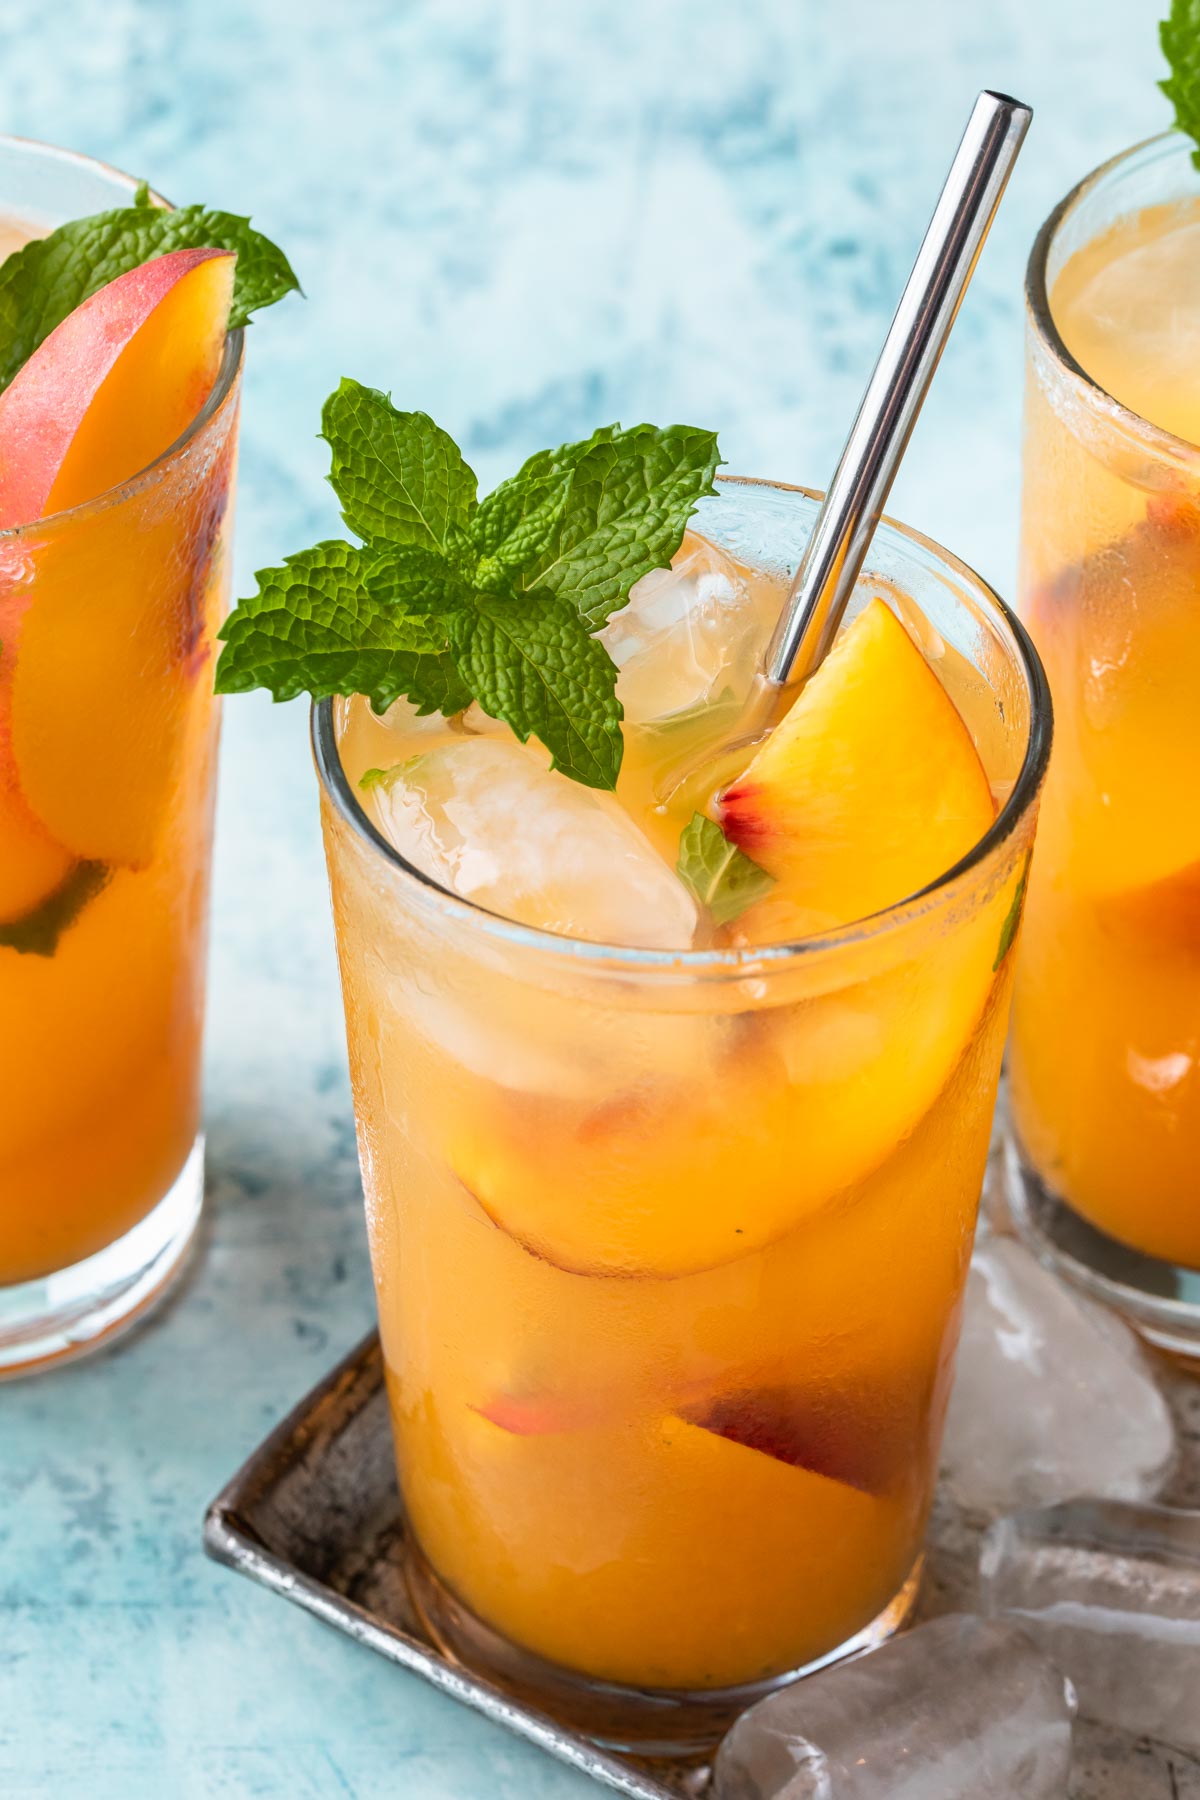 Peach mojito in a tall glass with a metal straw, mint leaves and a peach slice for garnish.